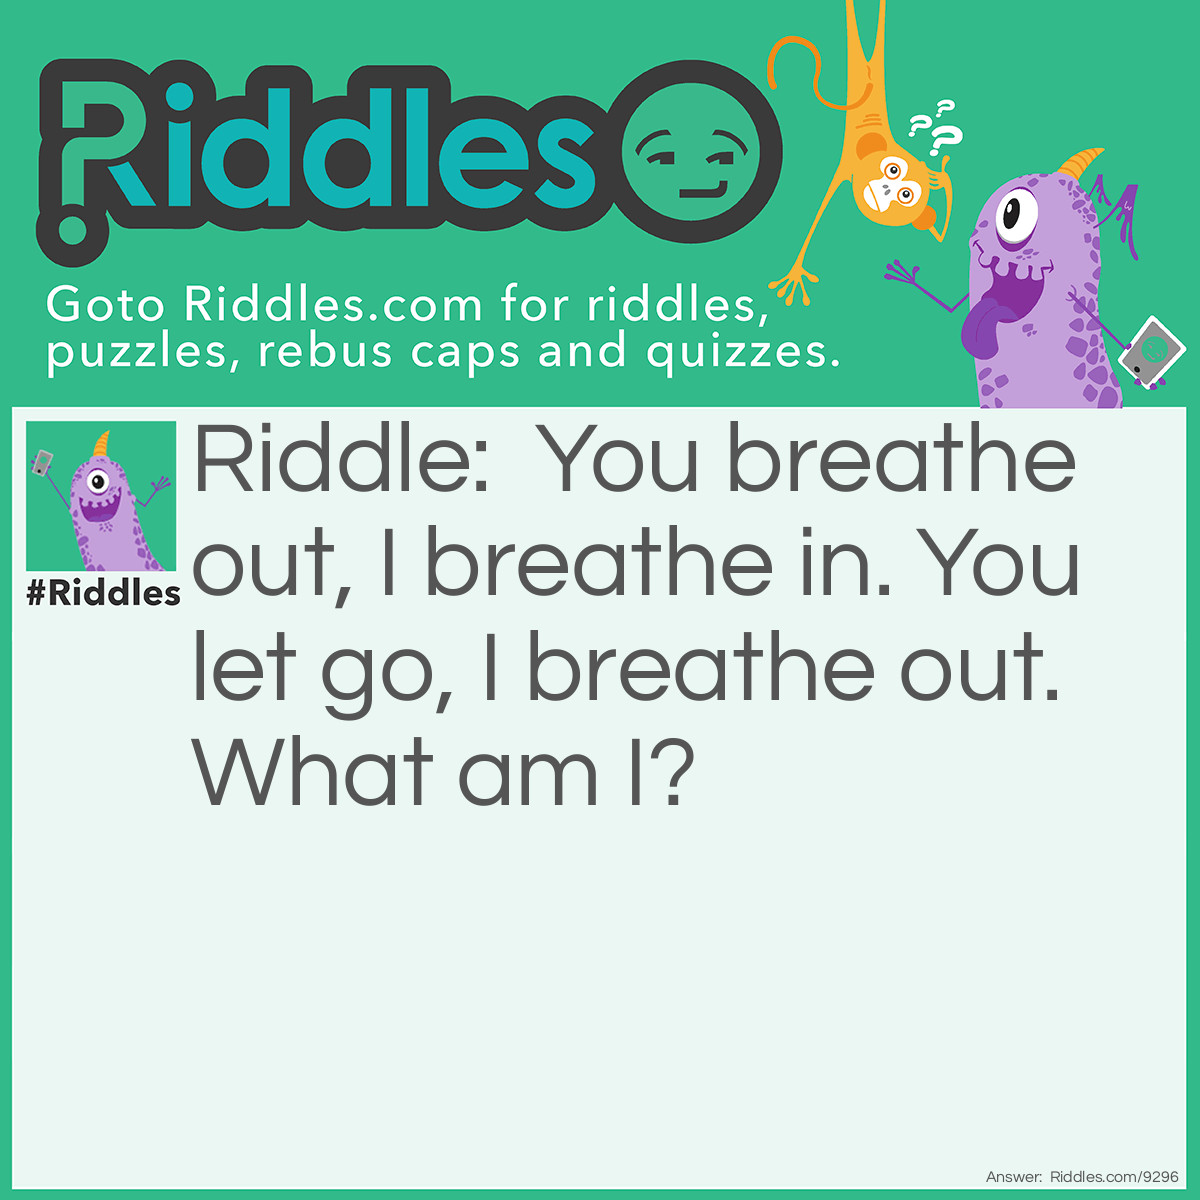 Riddle: You breathe out, I breathe in. You let go, I breathe out. What am I? Answer: A Balloon.